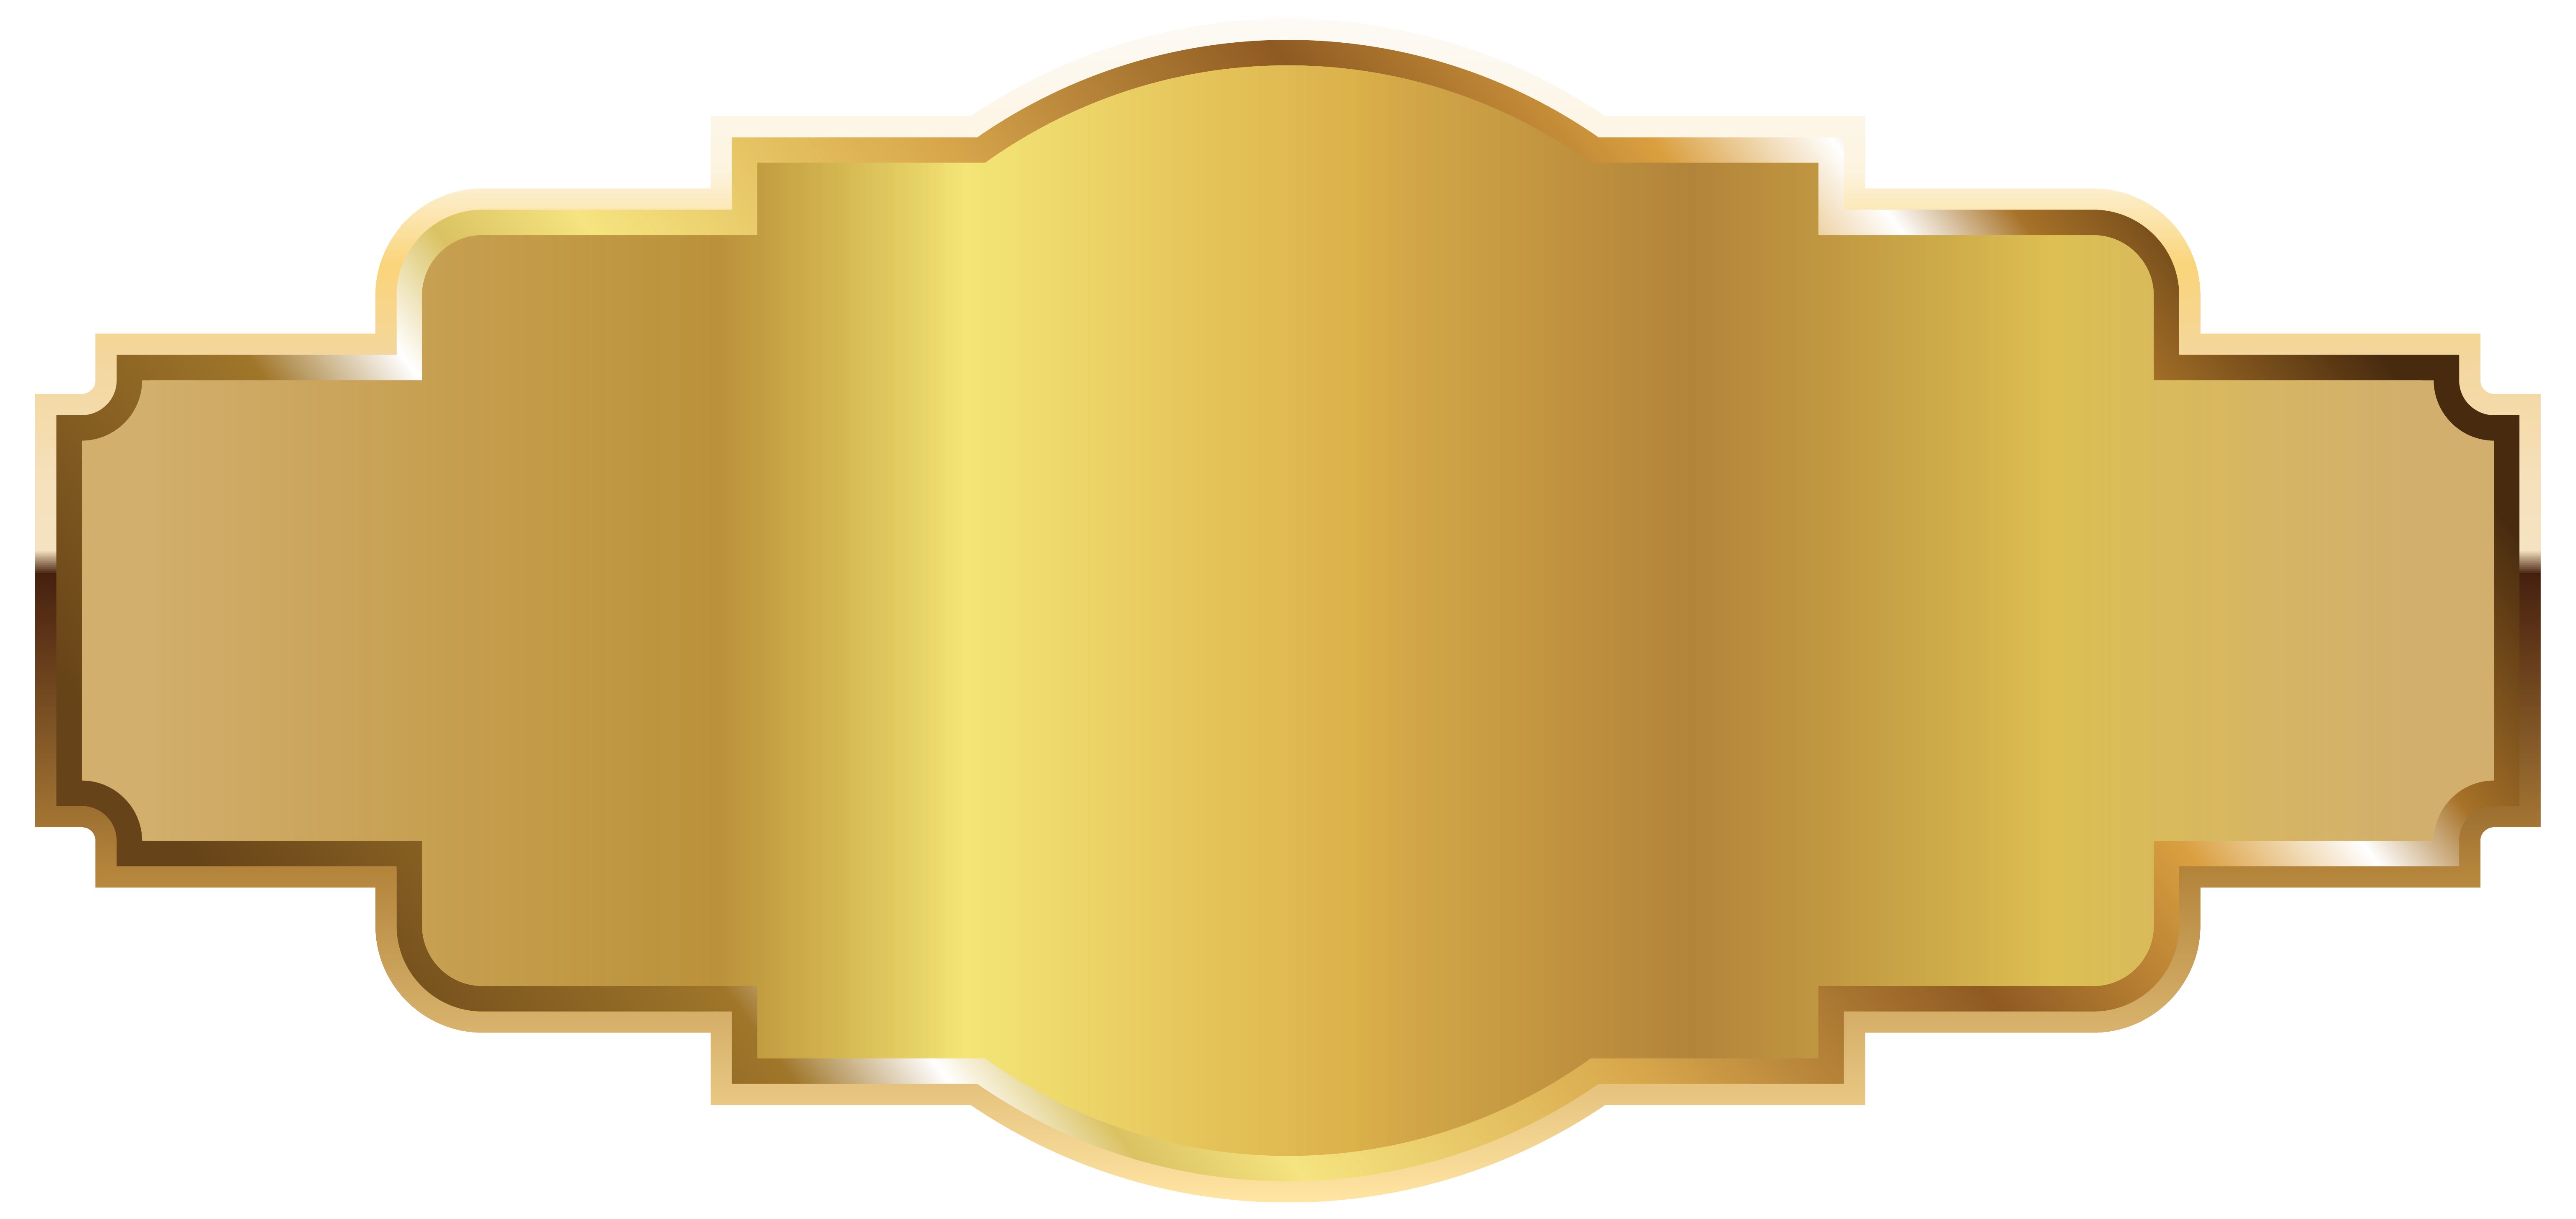 Gold Label PNG Image Quality Image And Transparent PNG Free Clipart